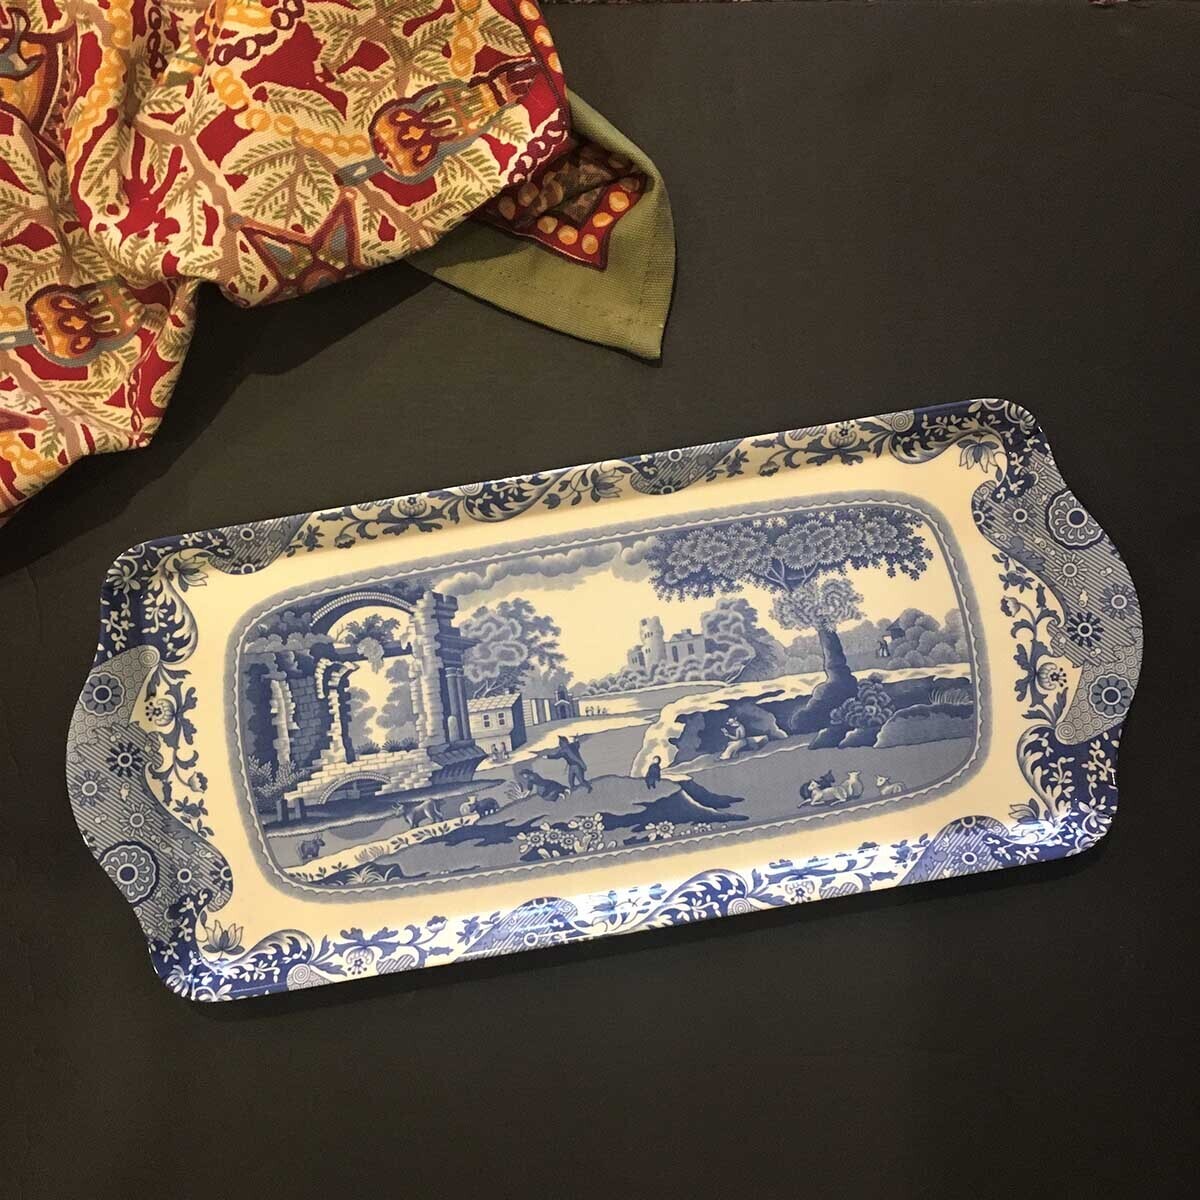 Classic Blue and White Melamine Serving Tray